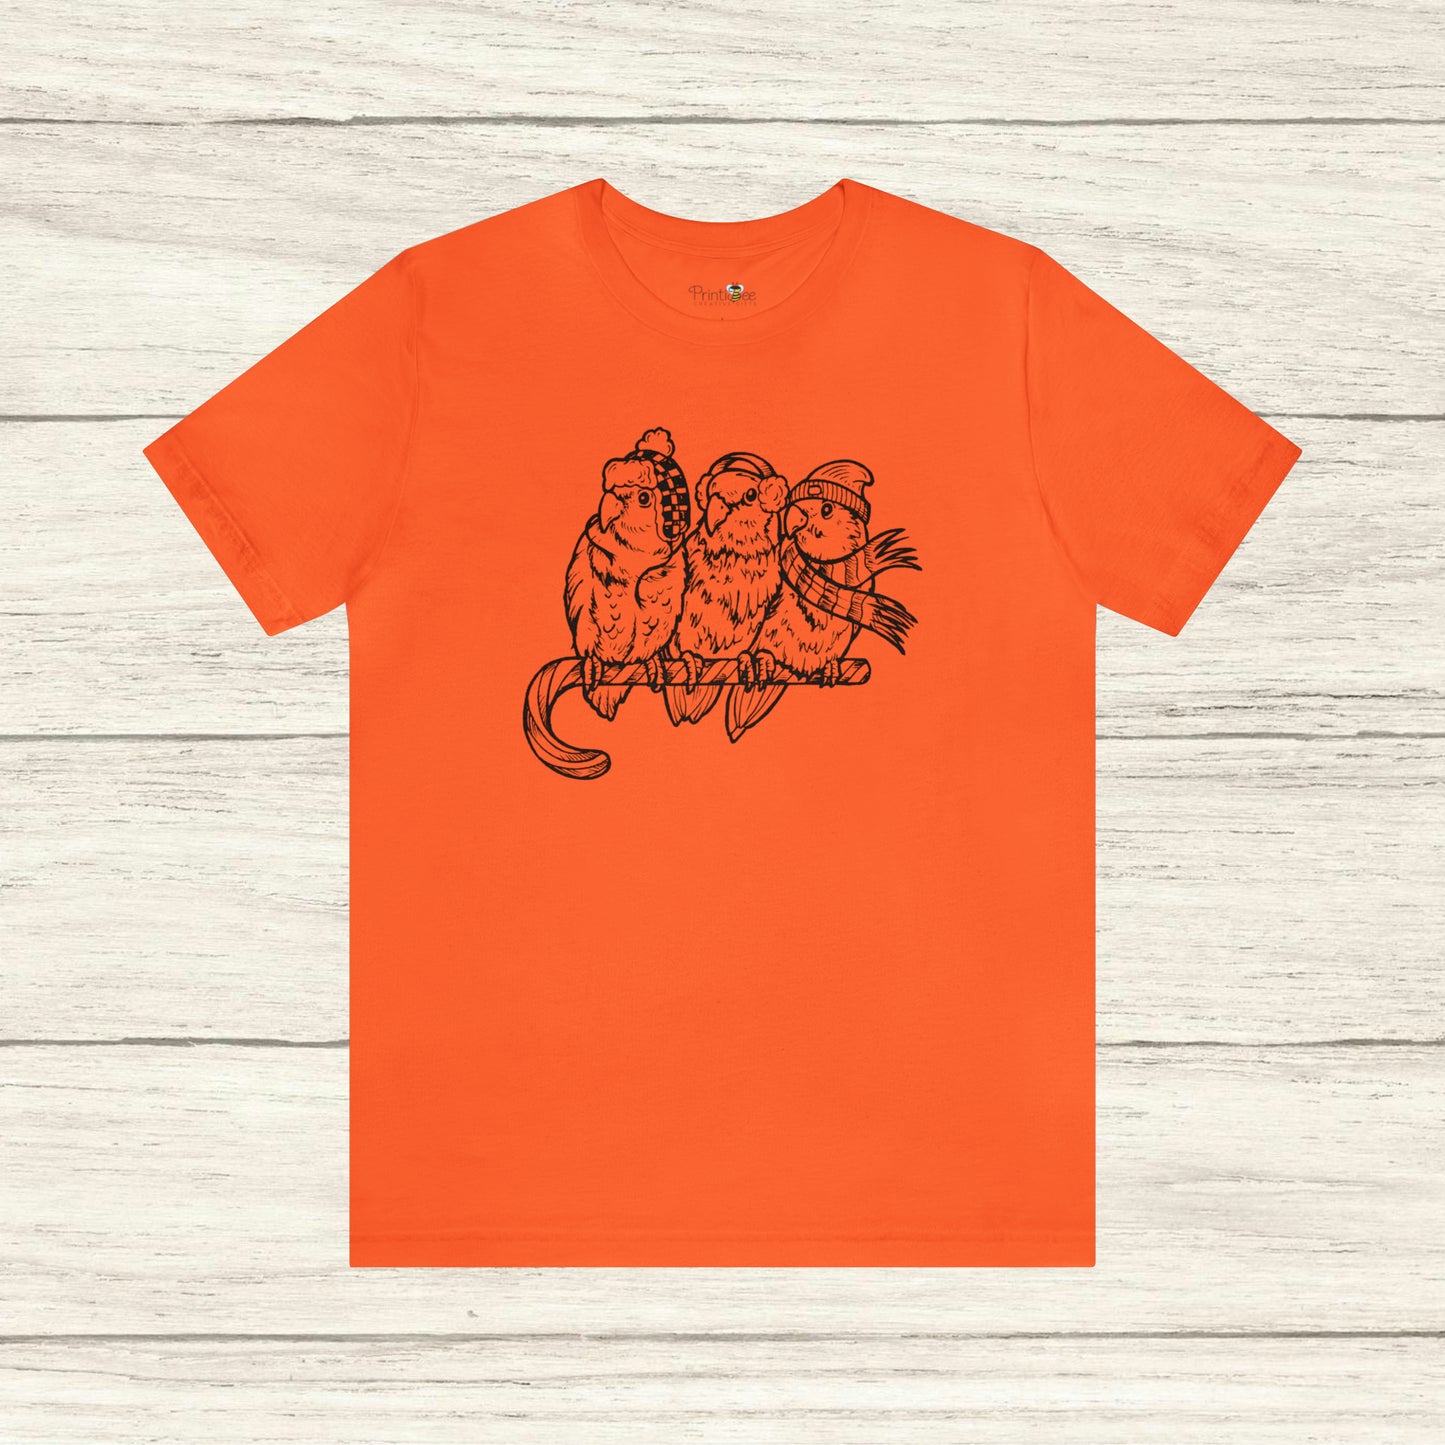 3 Lovebirds in Winter Wear & Perched on a Candy Cane, Line Art Tee